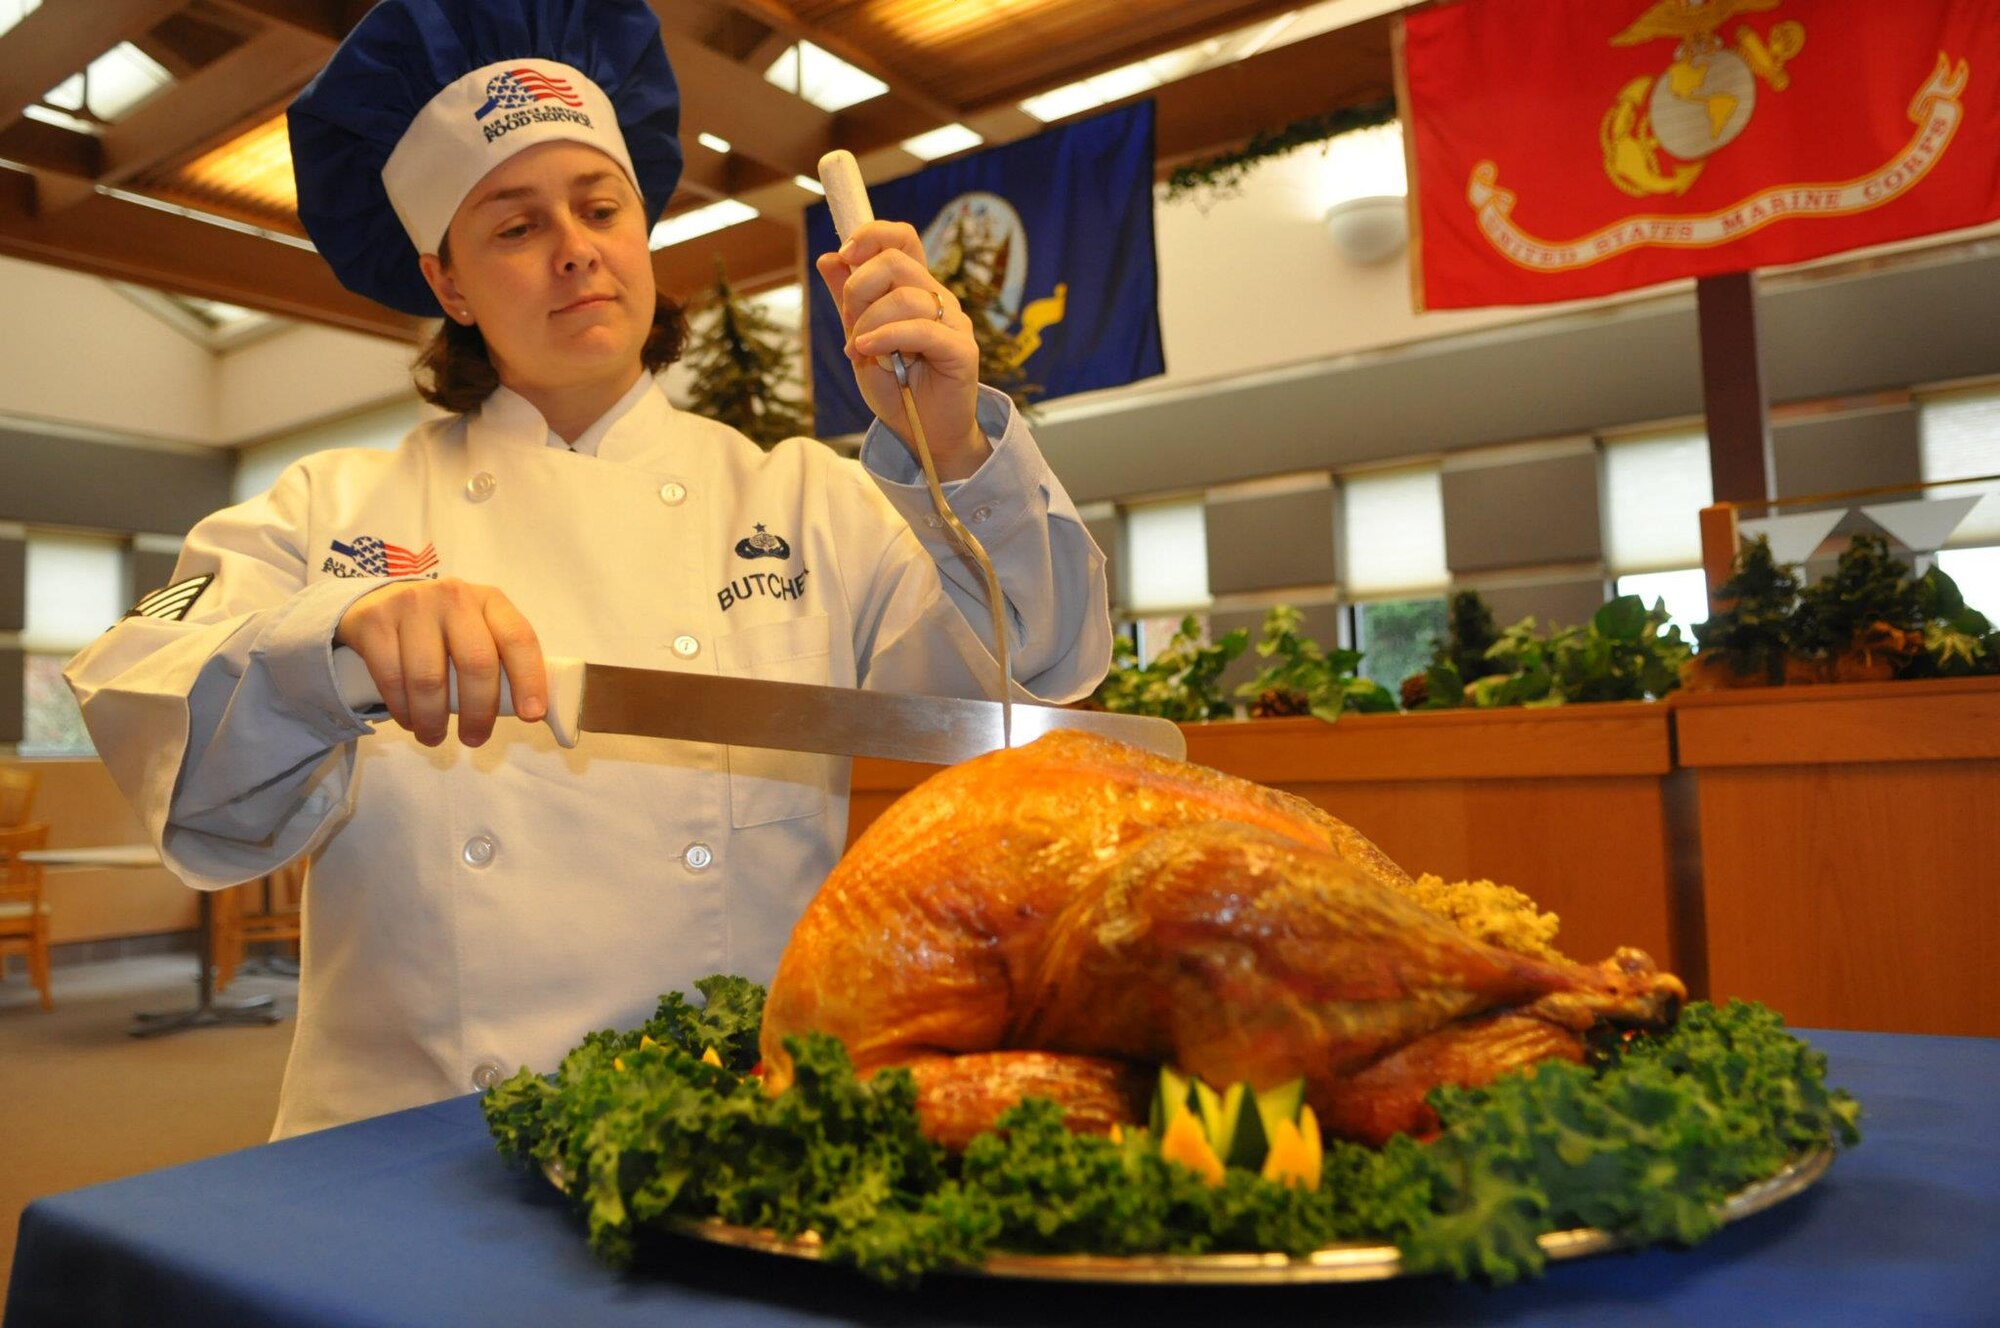 Tech. Sgt. Sarah Butcher, 627th Force Support Squadron dining facility manager, starts to carve a turkey during the Thanksgiving Day meal Nov. 24, 2011 at the Olympic Dining Facility, Joint Base Lewis-McChord, Wash. (U.S. Air Force photo/Tech. Sgt. Oshawn Jefferson)